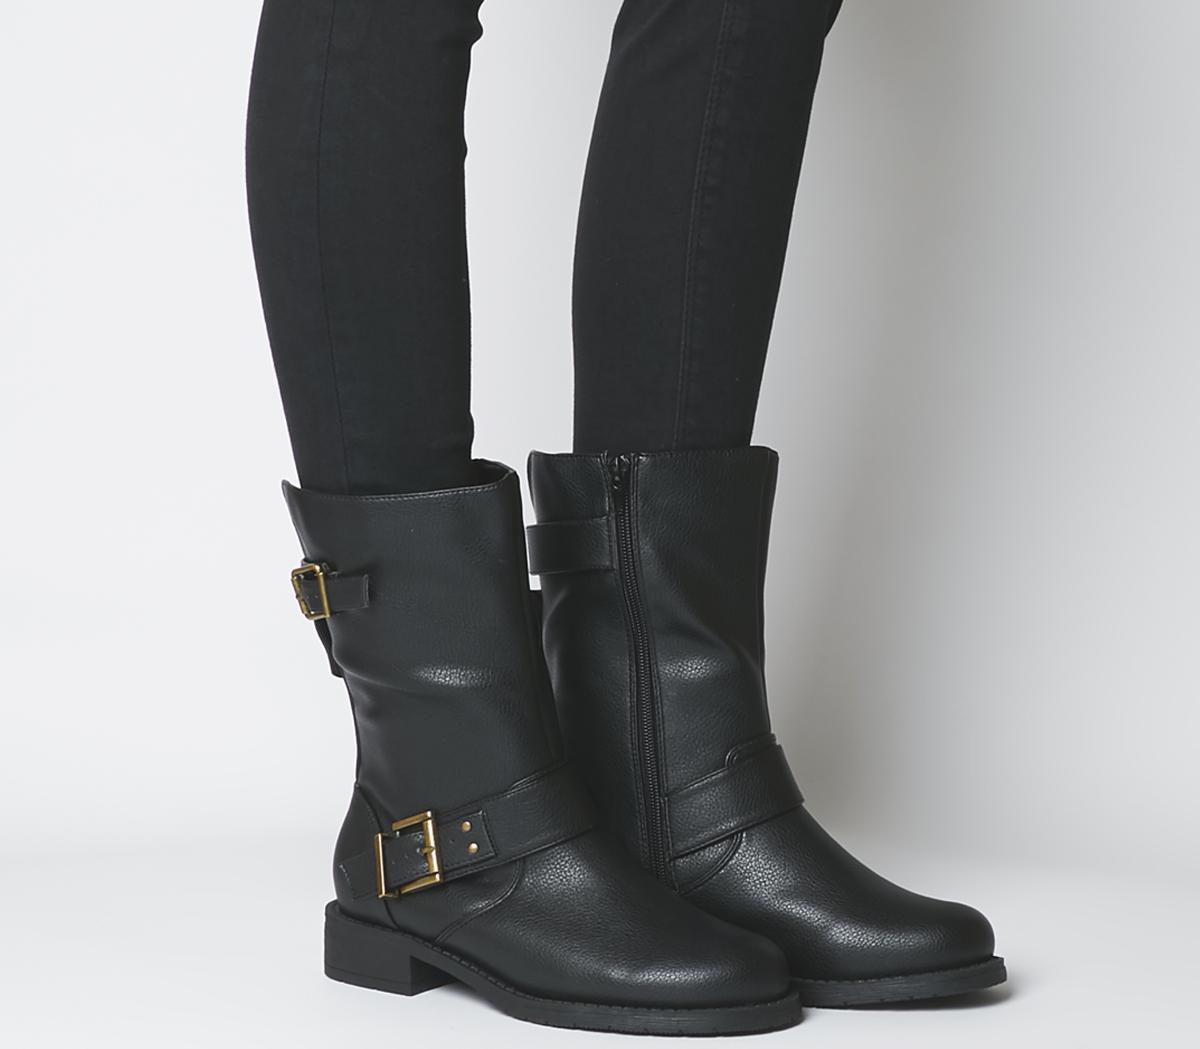 knee high converse boots with buckles and straps